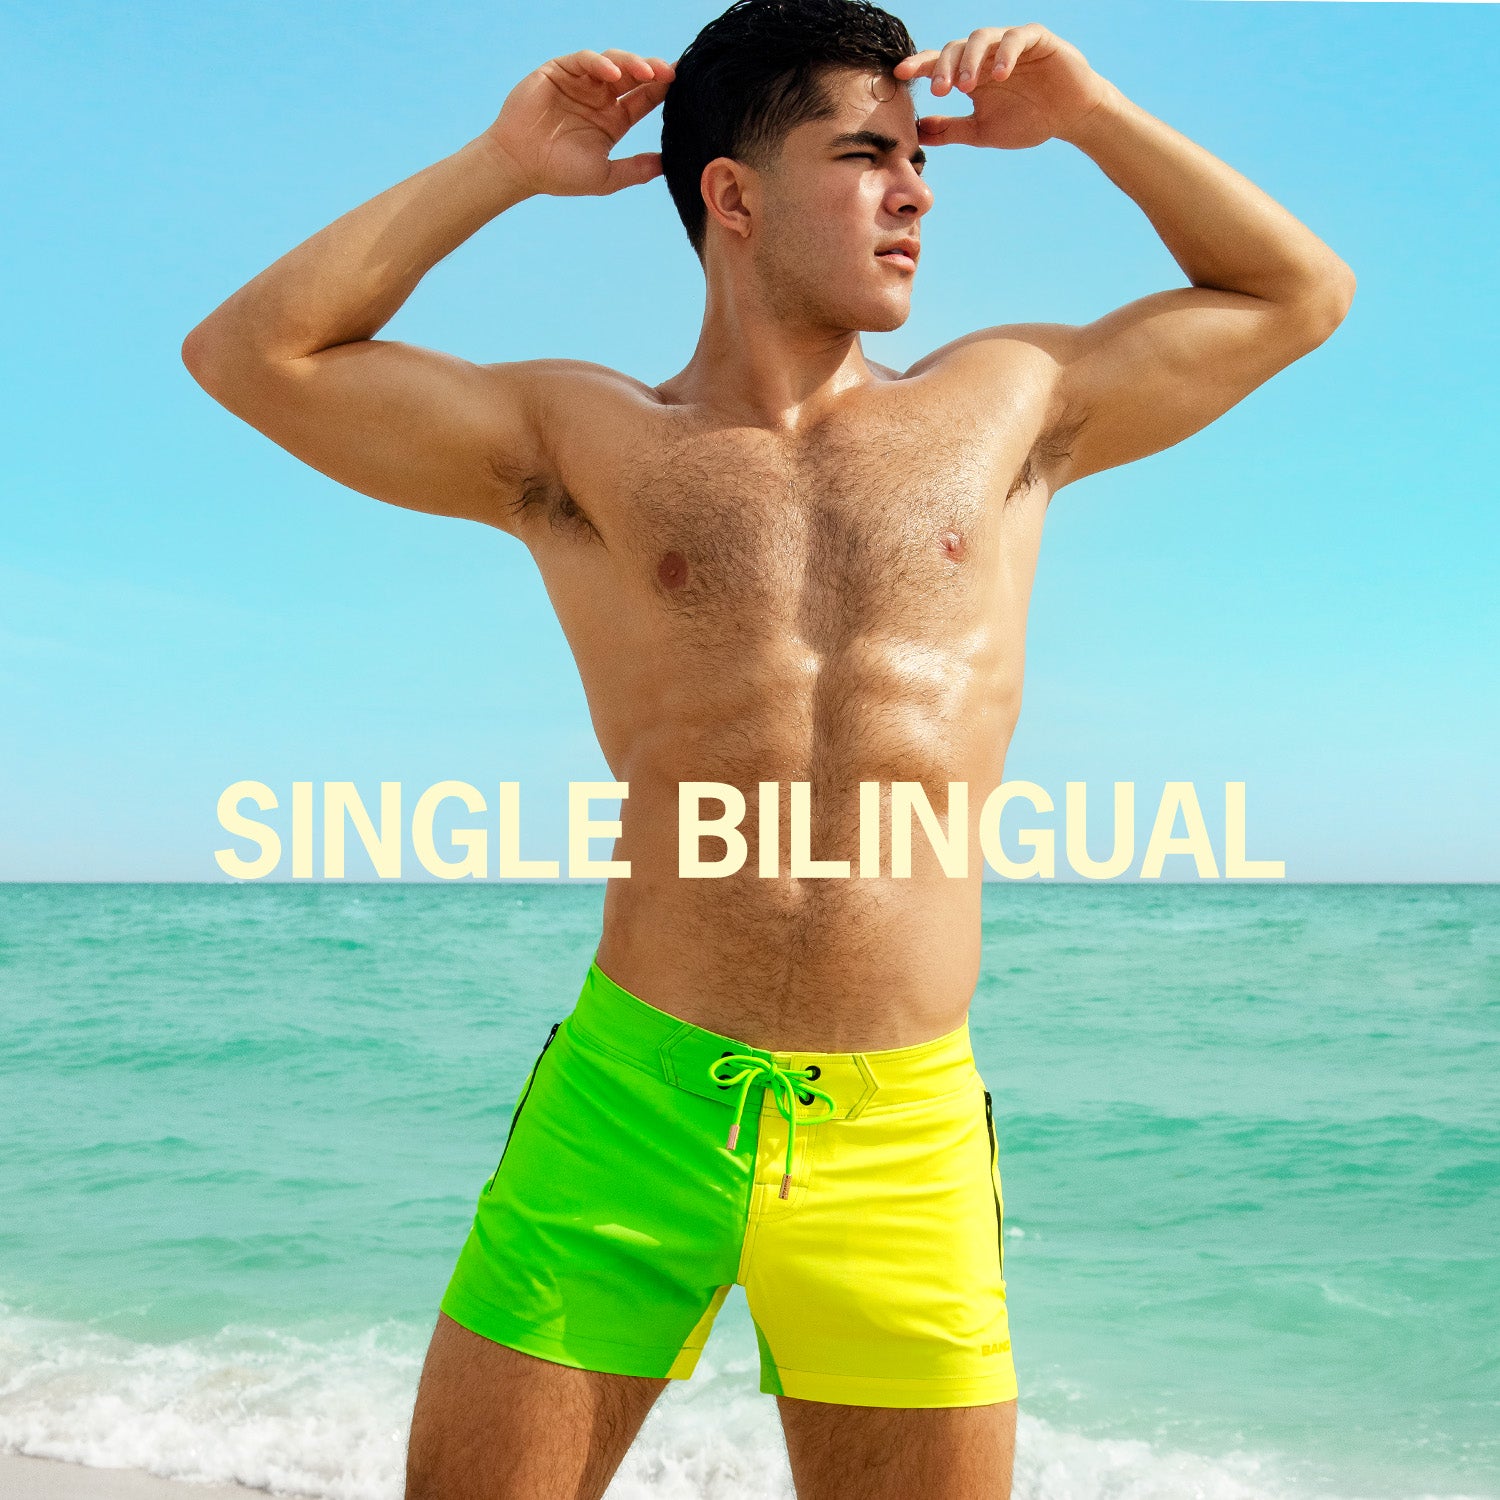 The new SINGLE BILINGUAL Beachwear Limited Series by BANG! Miami. Dual color block in bicolor neon green and fluo yellow bold summer hues.